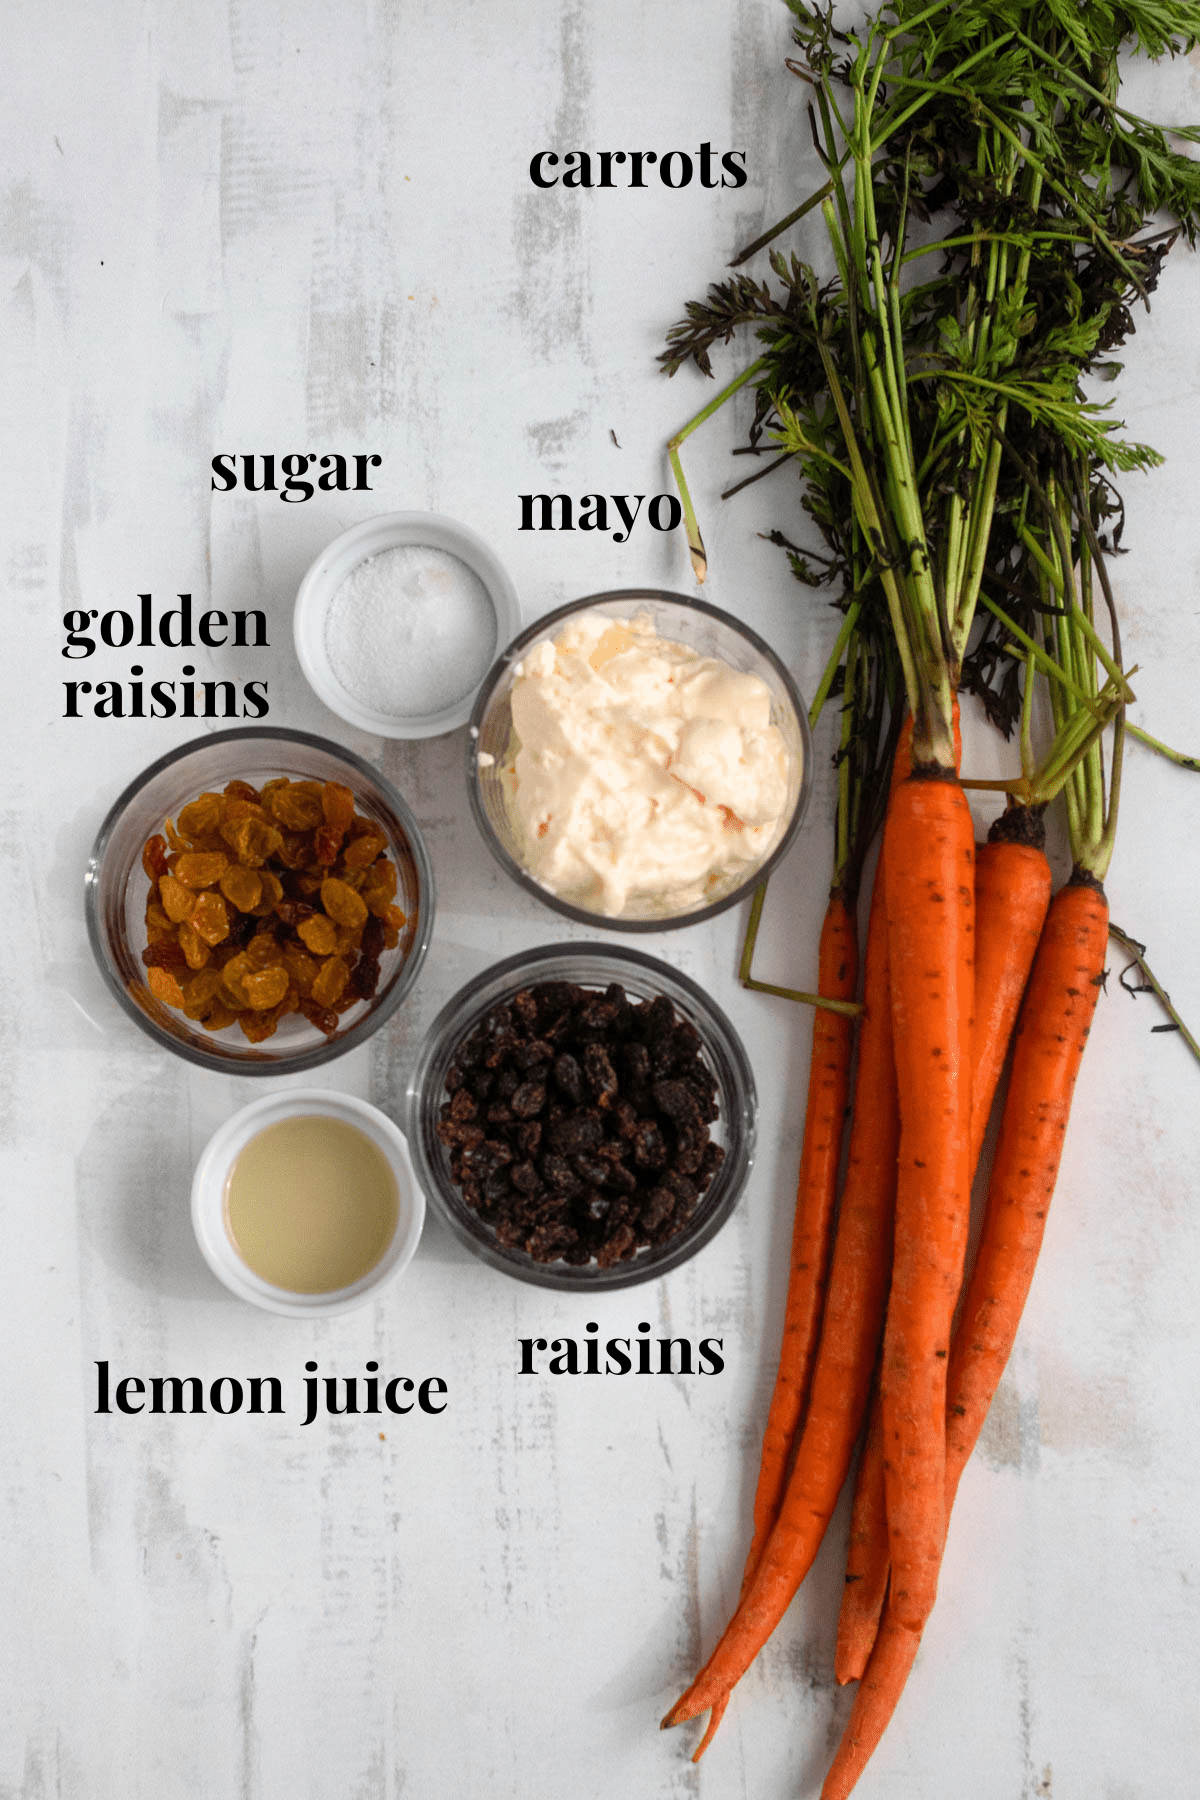 carrot raisin salad ingredients on a light colored background